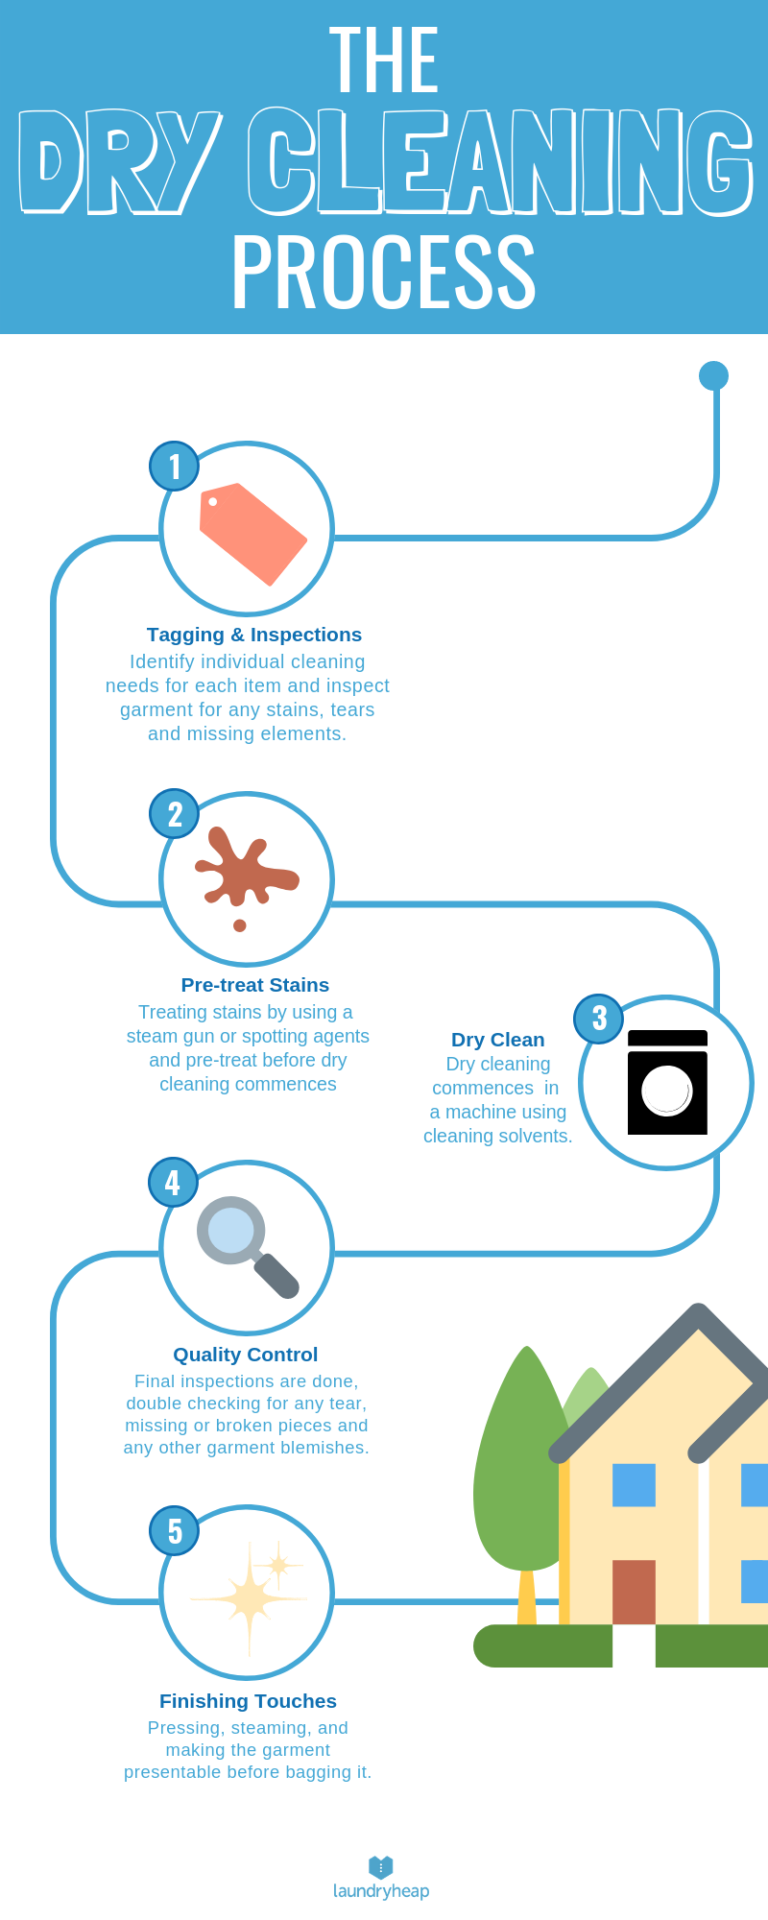 What Are The 5 Steps In Dry Cleaning?